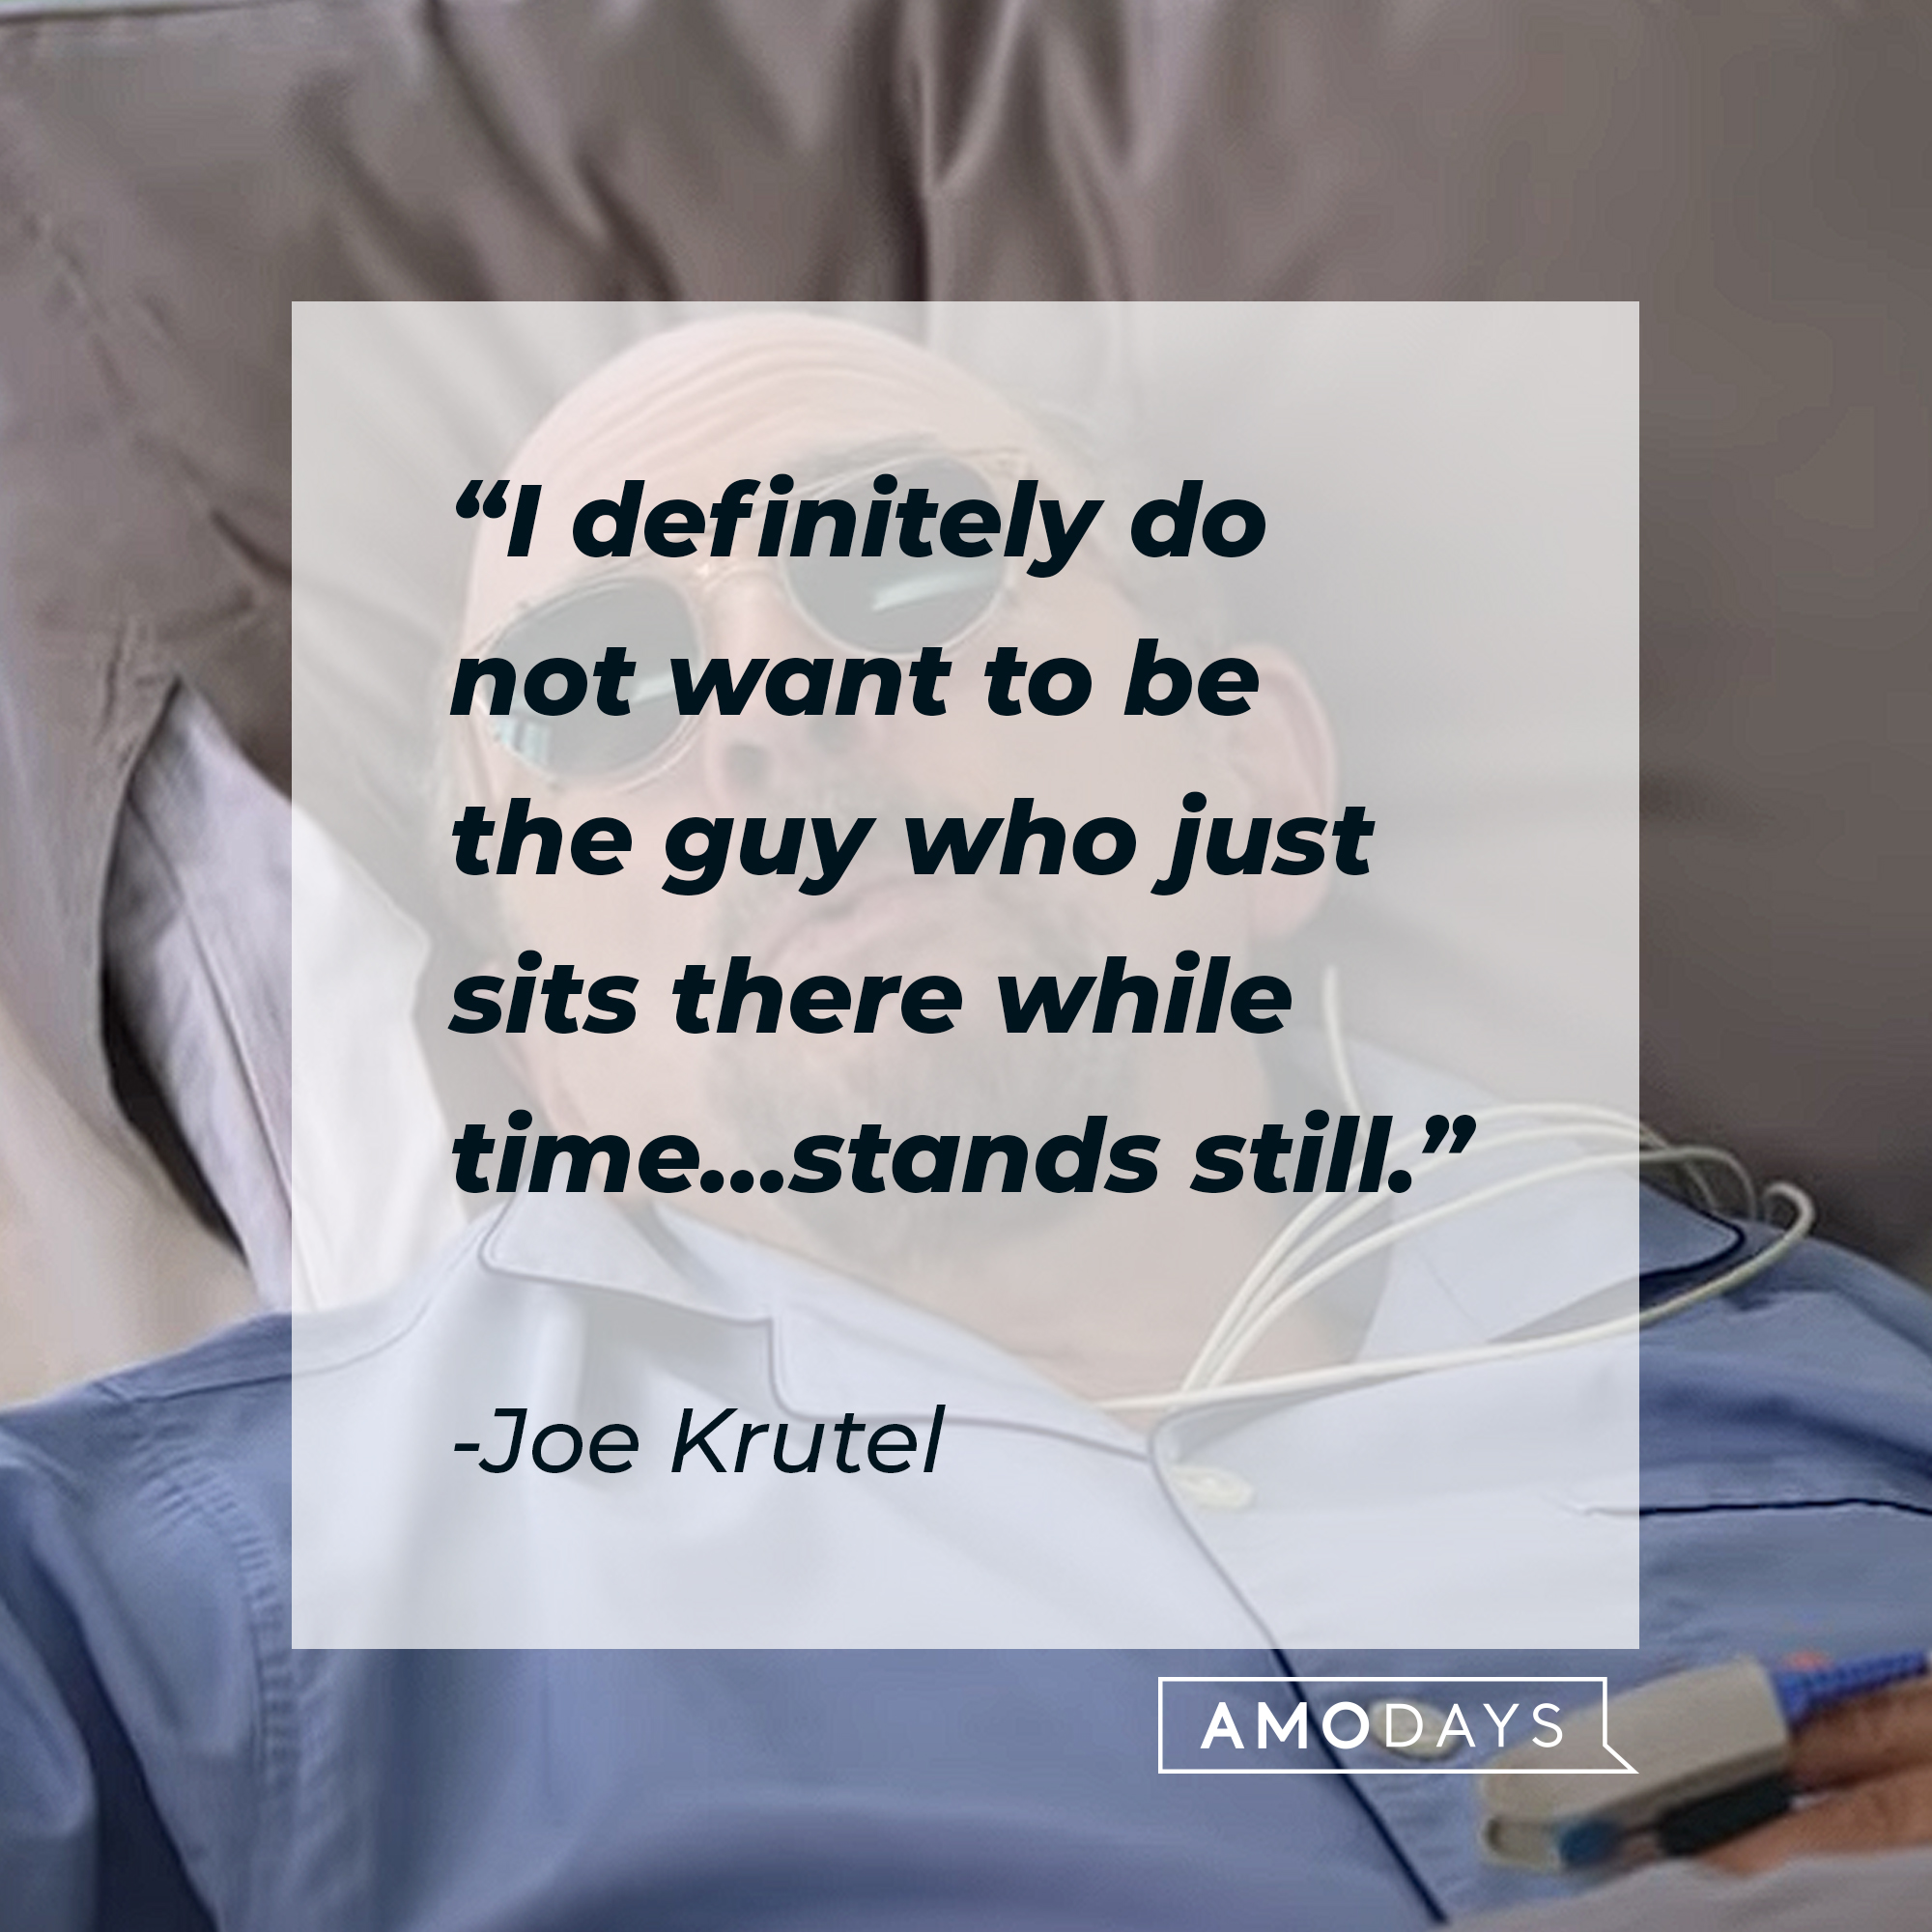 An image of Joe Krutel with his quote: “I definitely do not want to be the guy who just sits there while time…stands still.” | Source: youtube.com/HBO